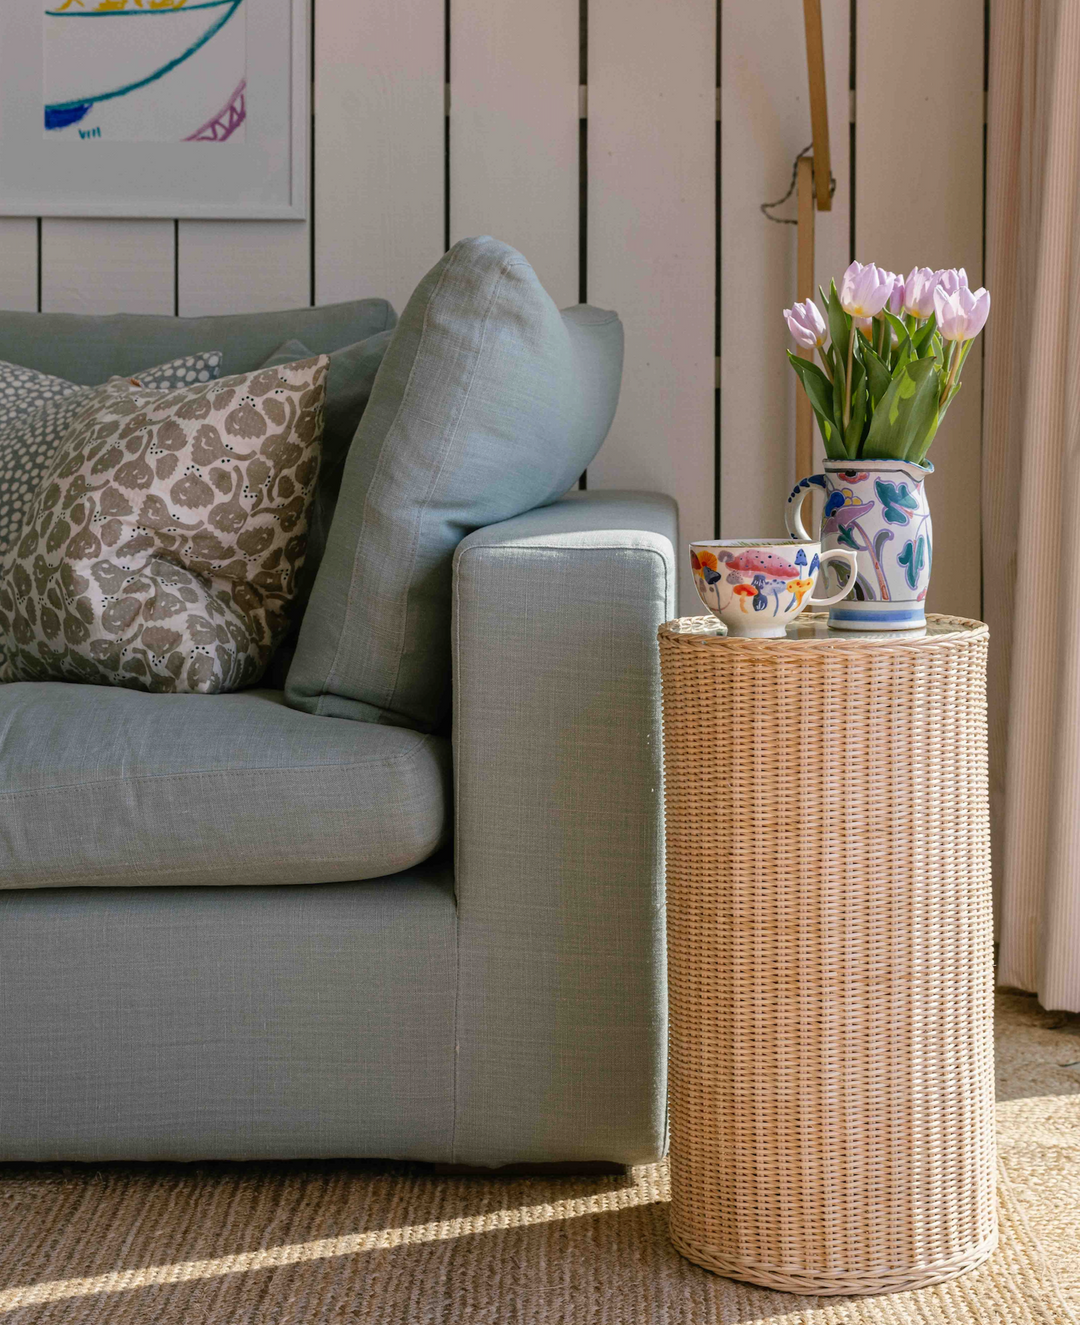 Zenith Round Rattan Side Table